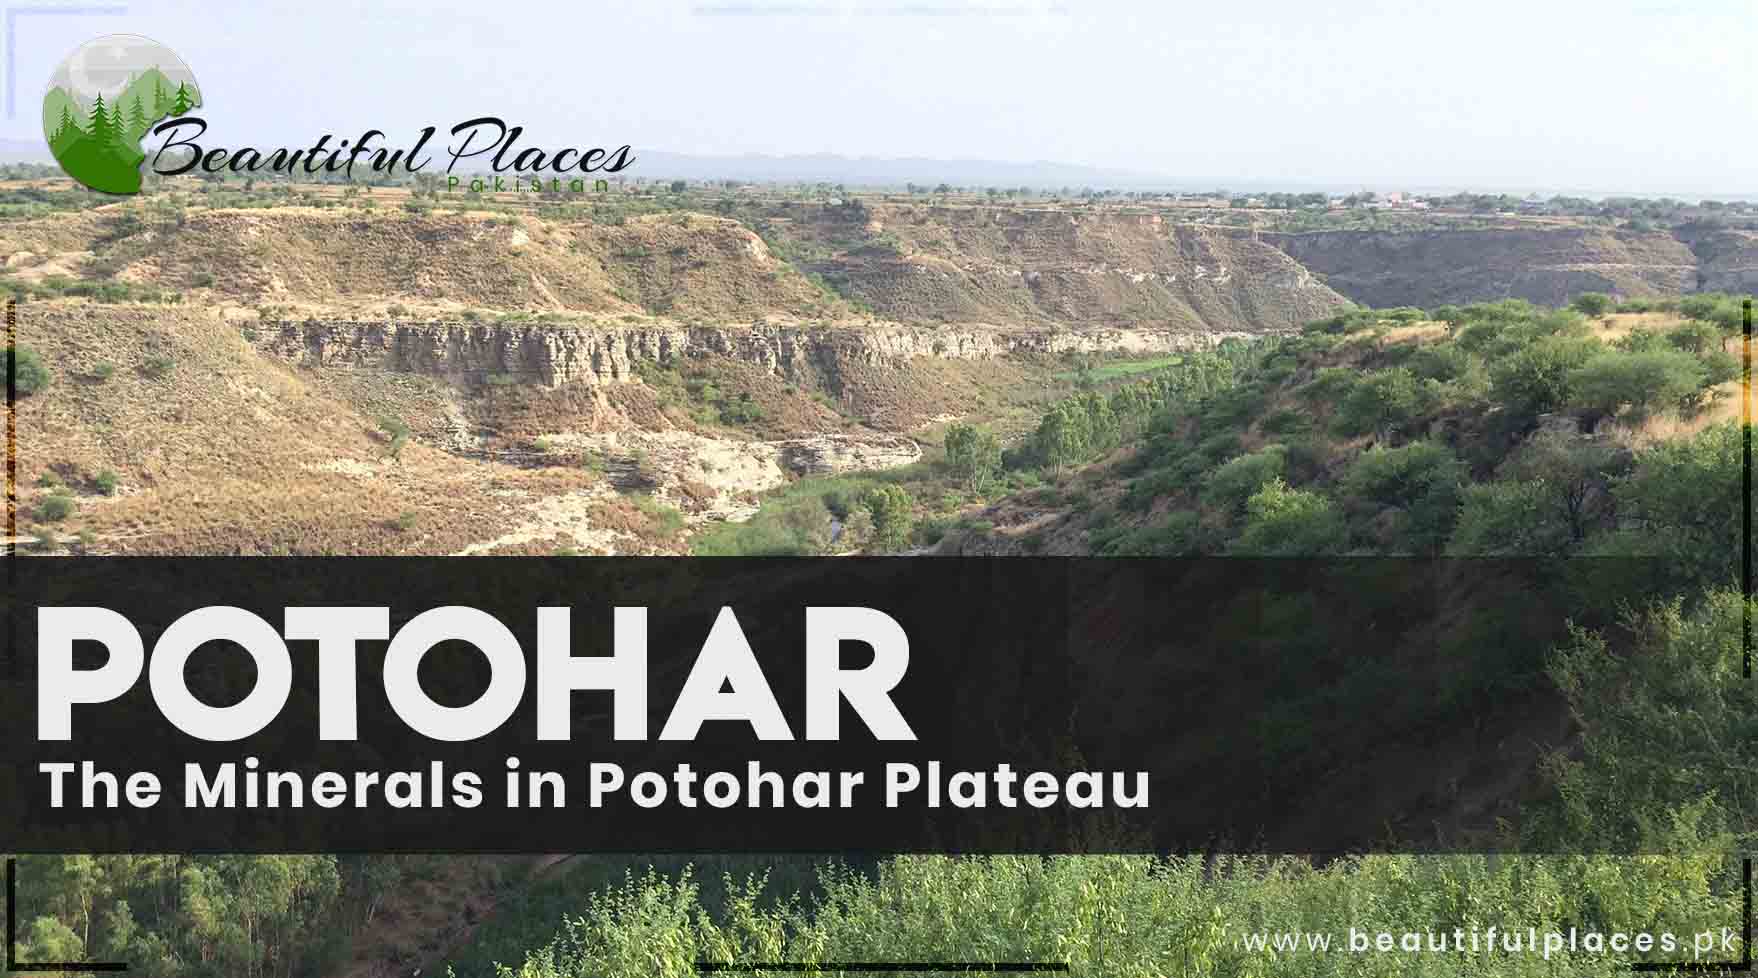 The Minerals in Potohar Plateau